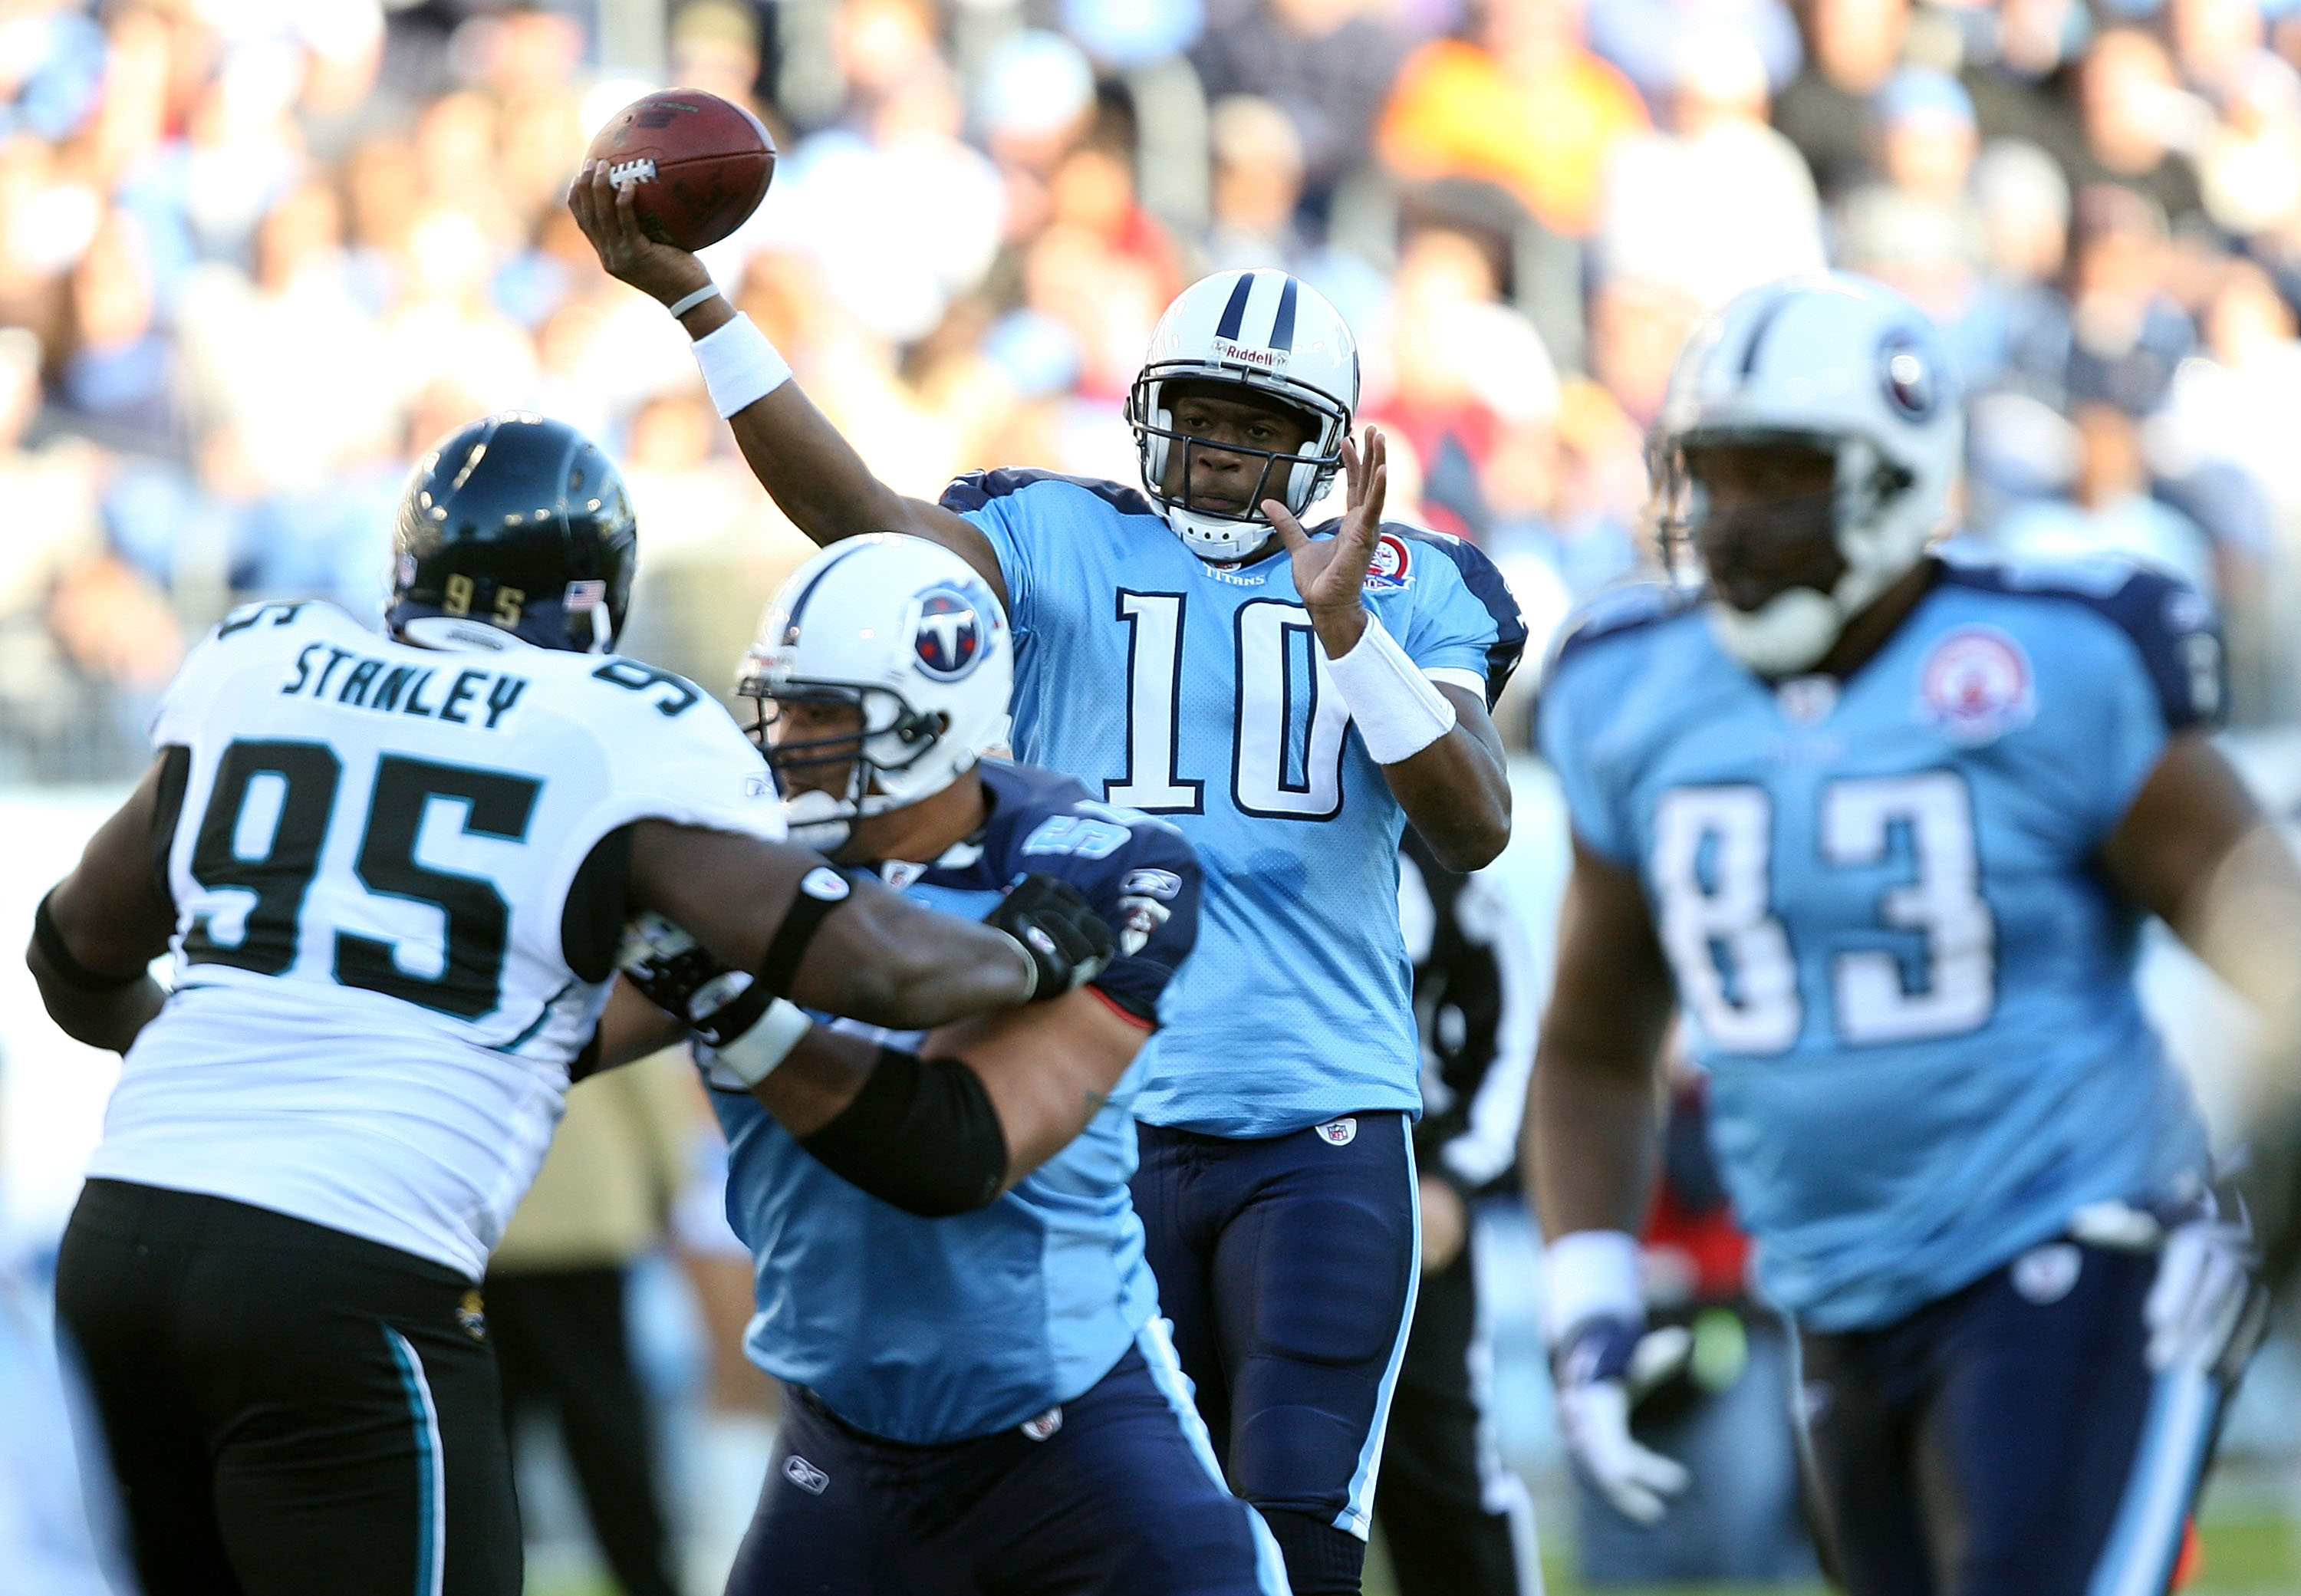 Jacksonville Jaguars vs. Tennessee Titans Prediction and Preview 